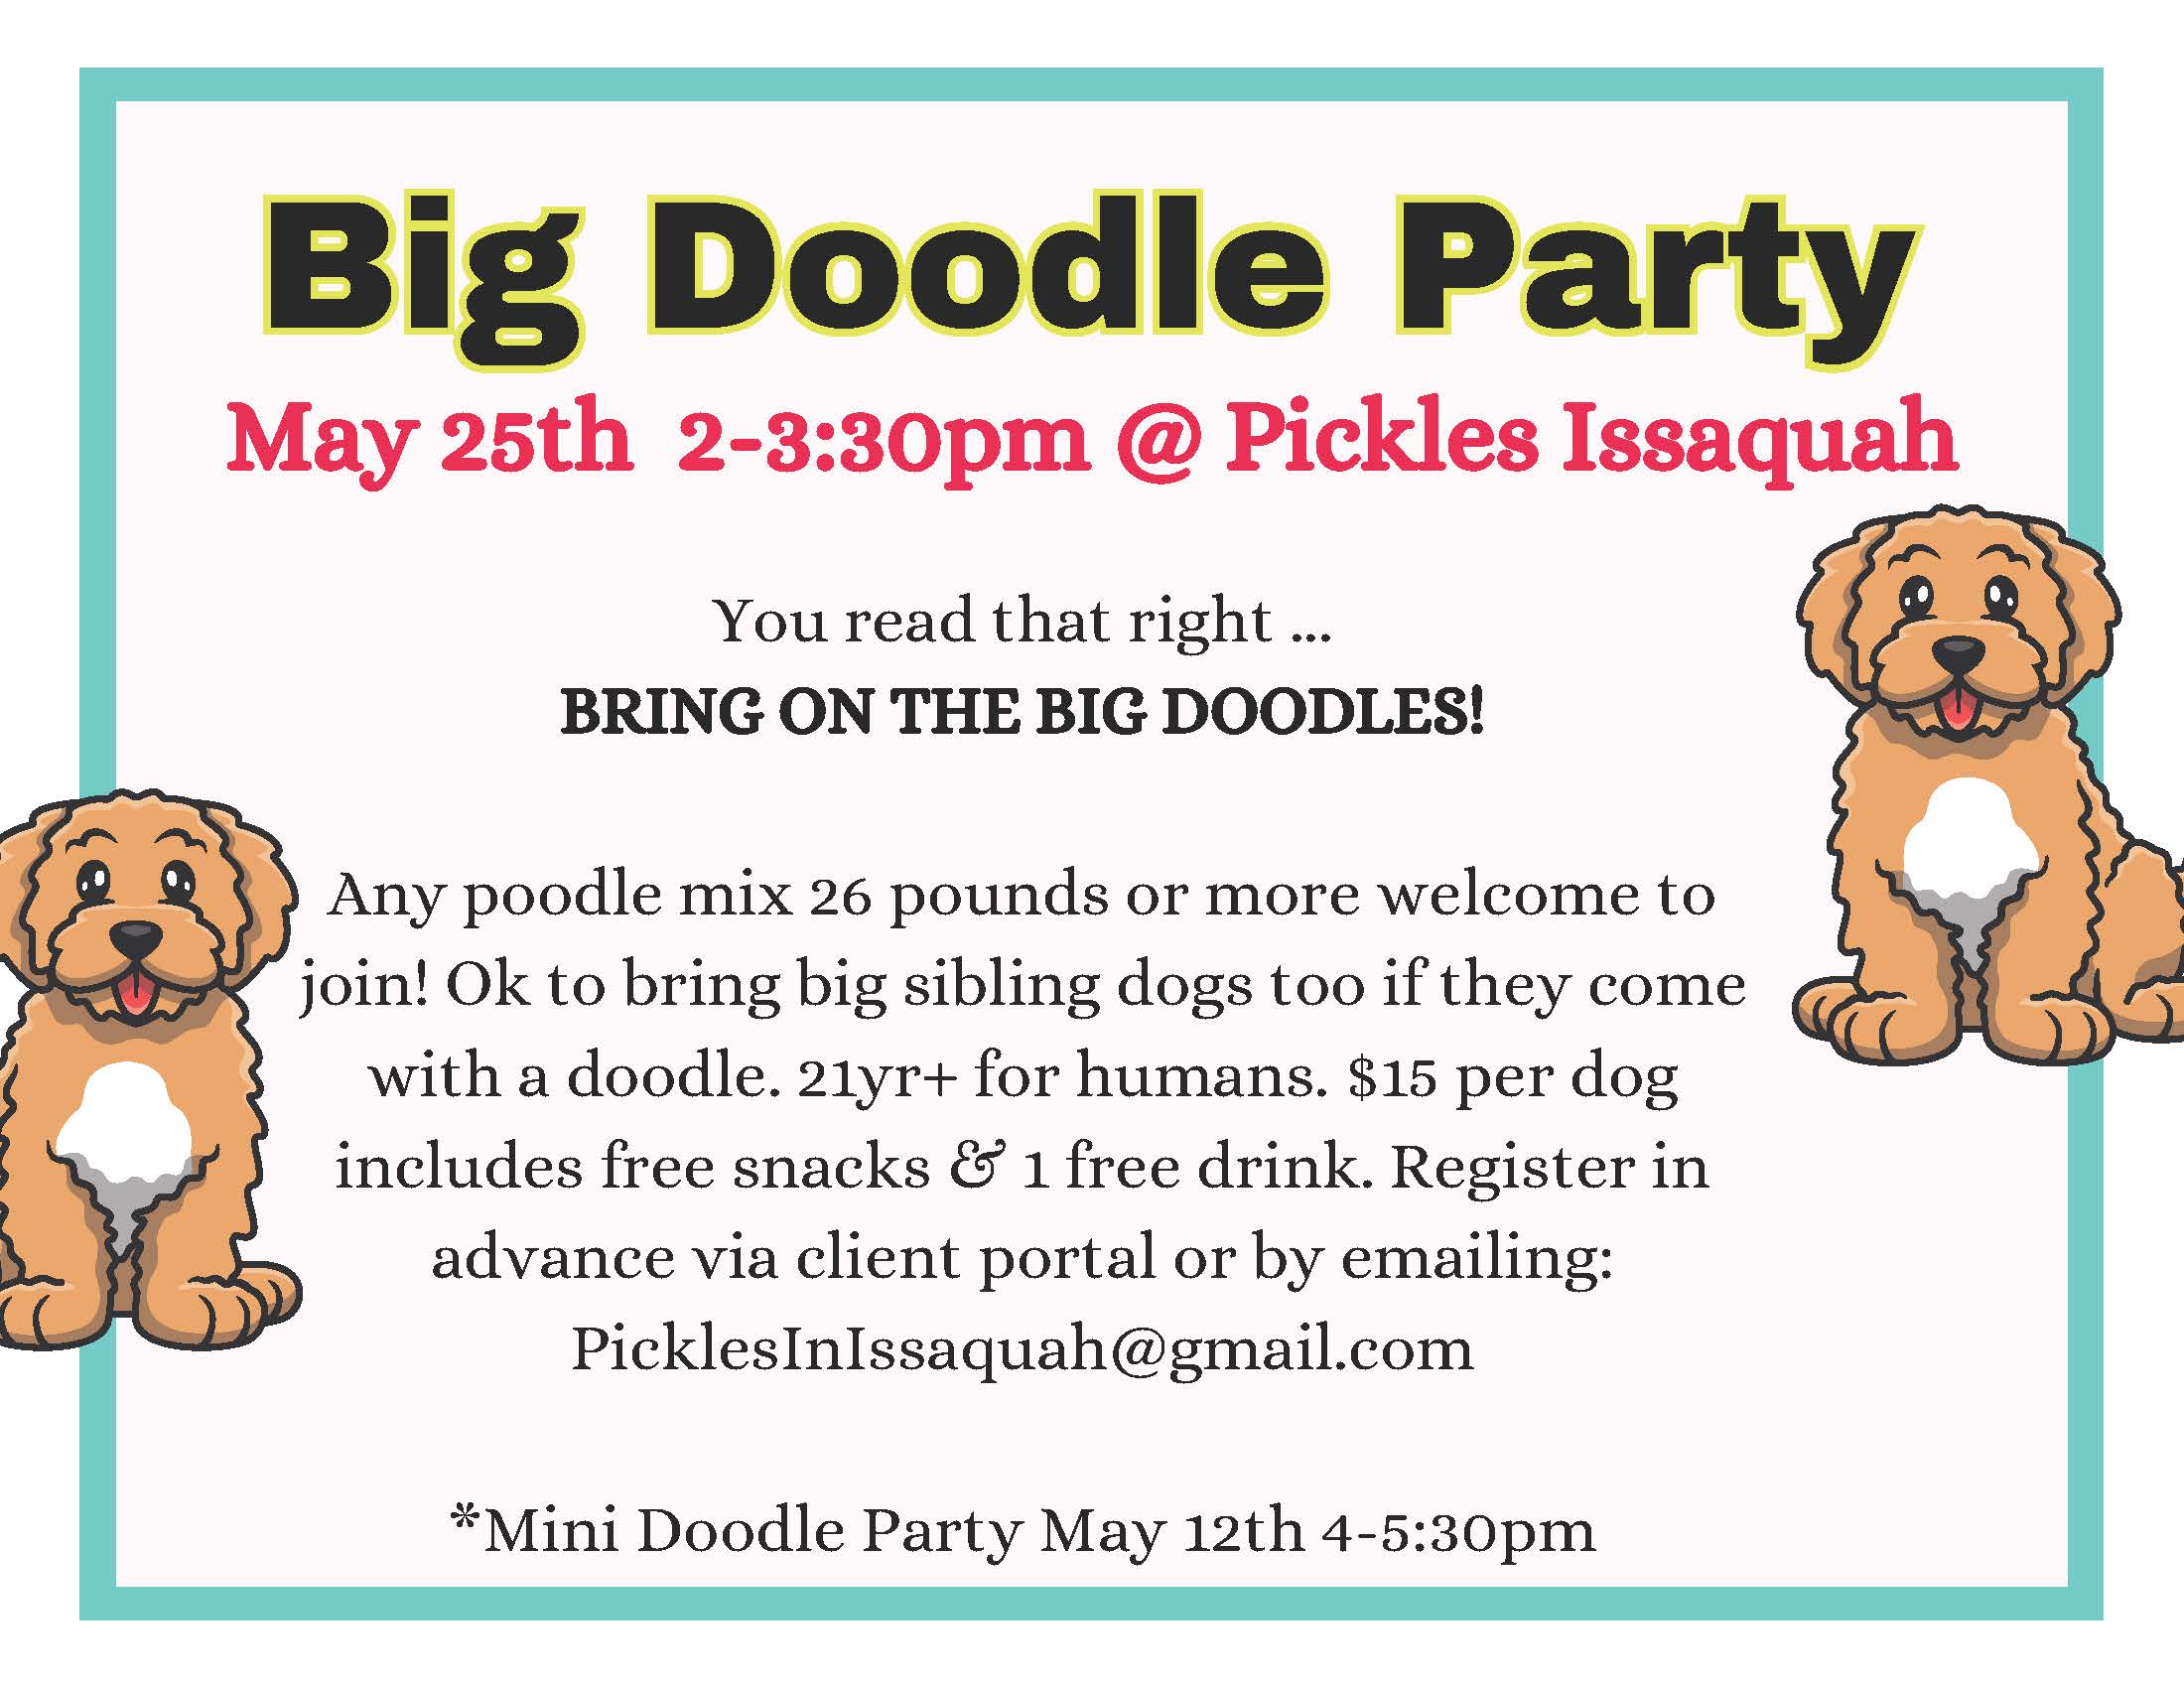 Big doodle party May 25th